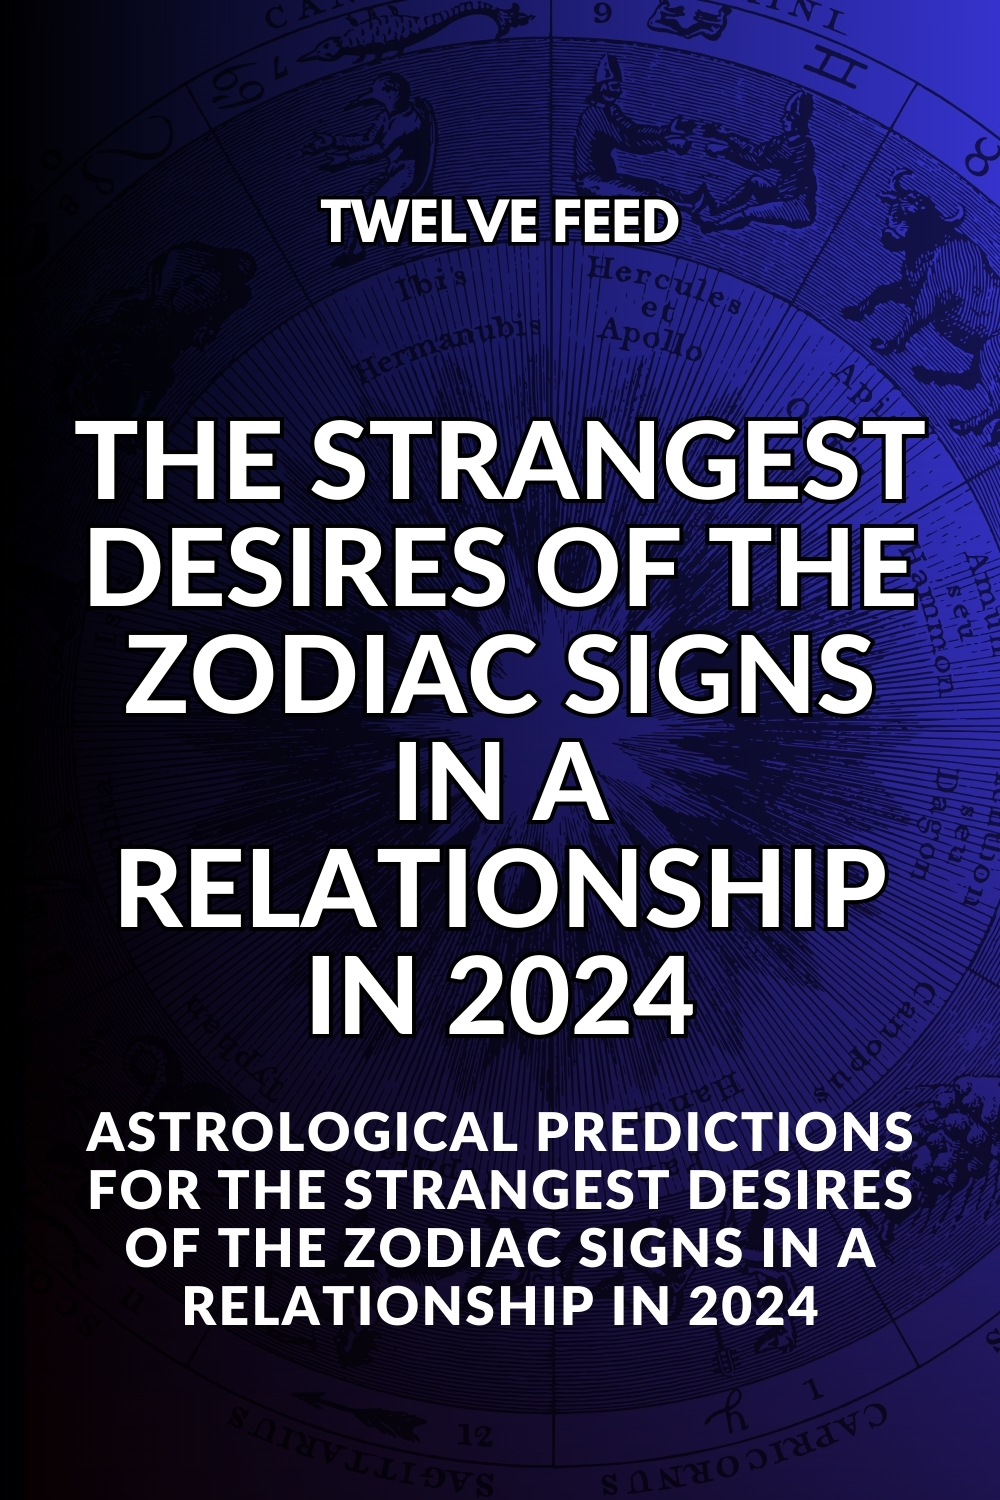 The Strangest Desires Of The Zodiac Signs In A Relationship In 2024